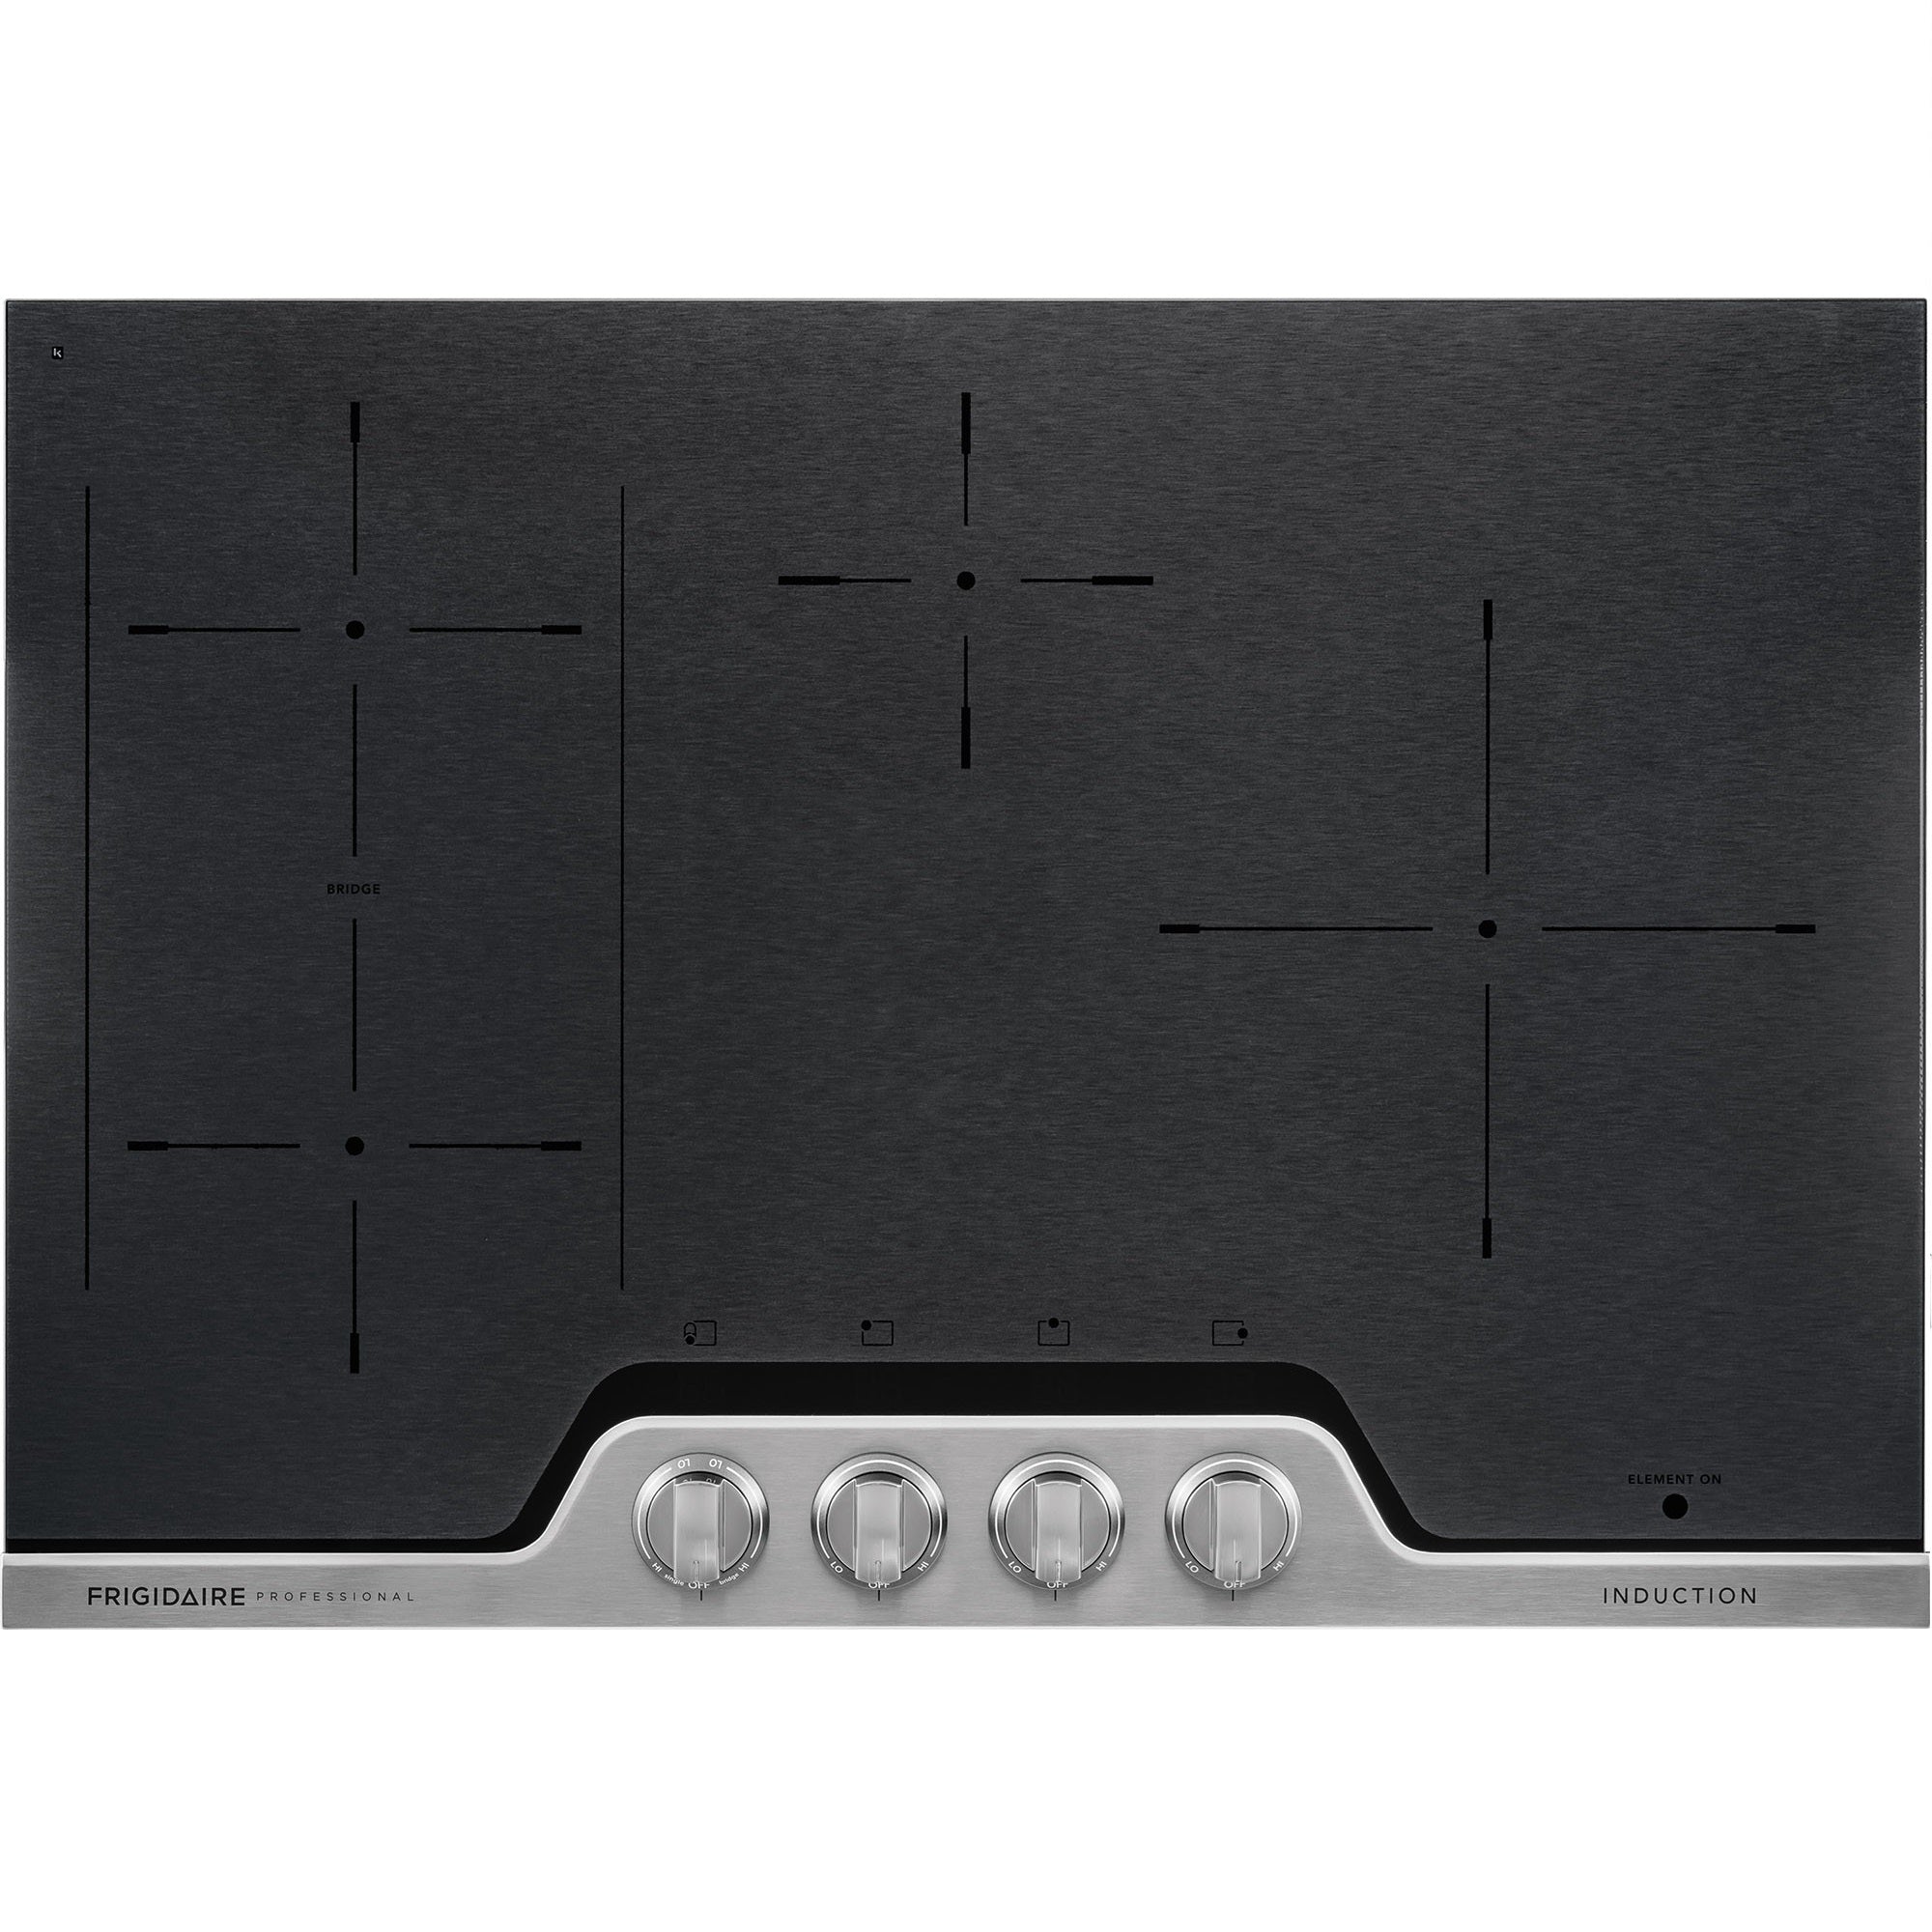 FPIC3077RF - COOKTOPS - Frigidaire Professional - Induction - Stainless Steel - Open Box - COOKTOPS - BonPrix Électroménagers